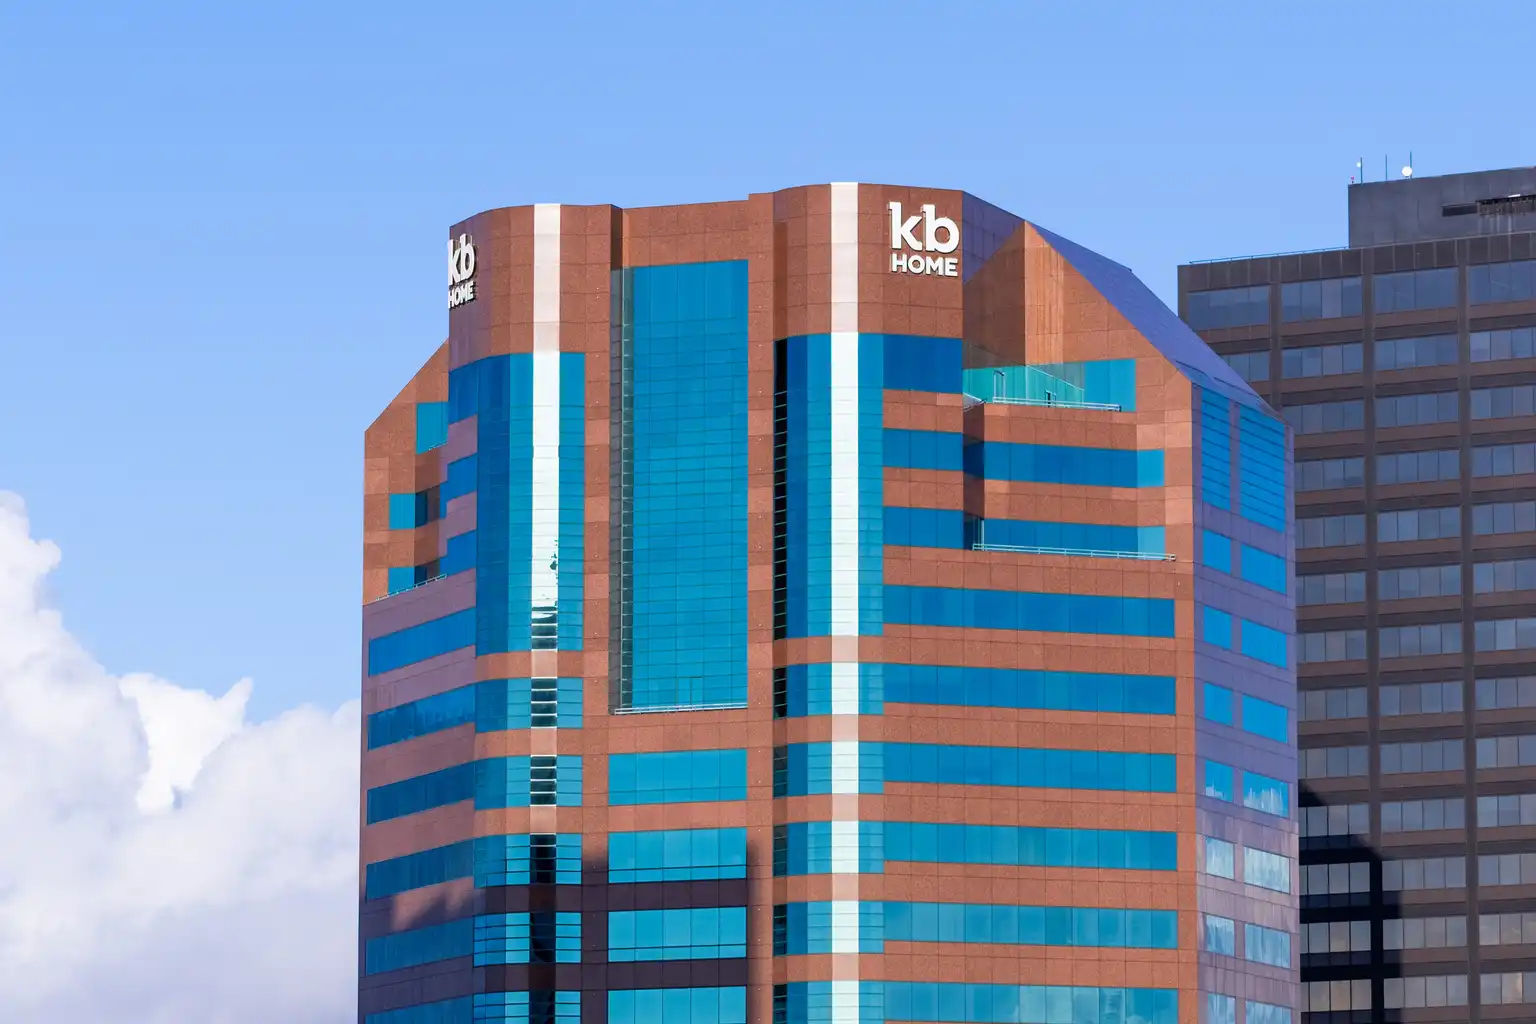 KB Home: Getting Attractive But Rates Are A Risk - Seeking Alpha